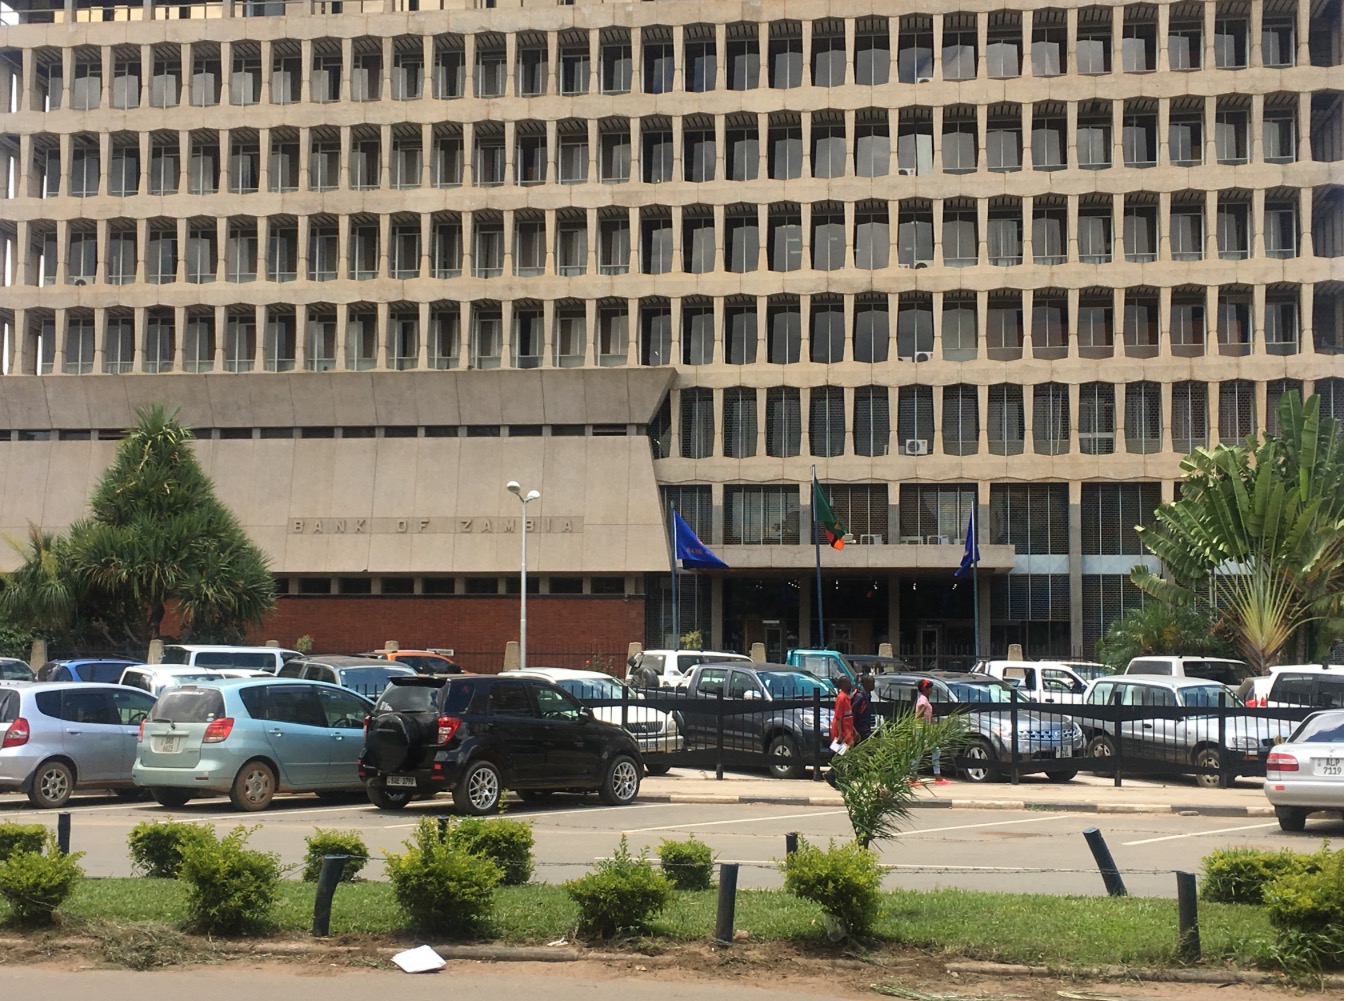 ZAMBIA: GOVERNMENT LIKELY TO IGNORE WARNINGS ON DEBT SERVICING STRESS